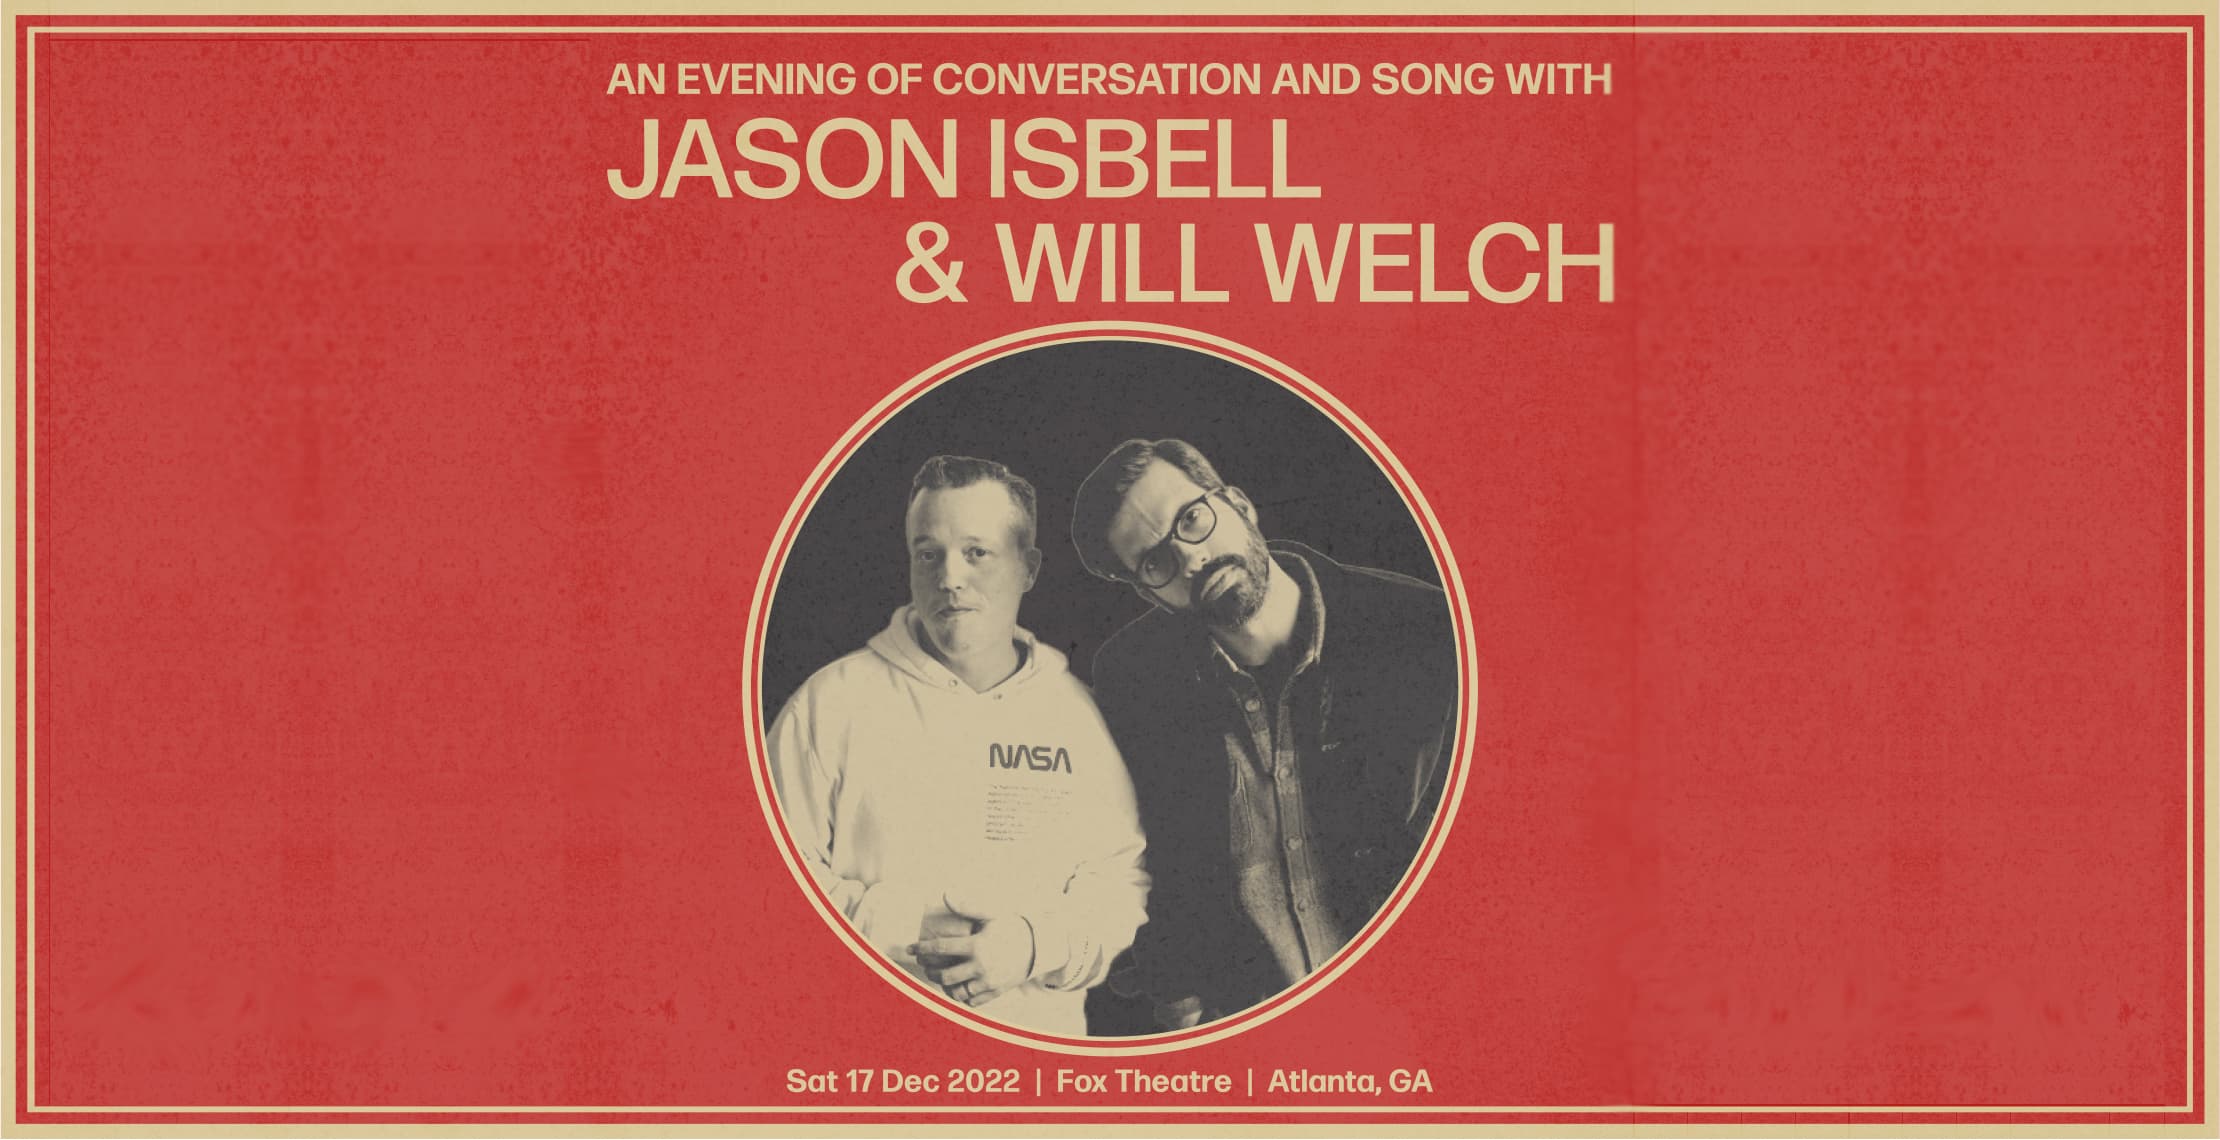 An Evening of Conversation and Song with Jason Isbell X Will Welch